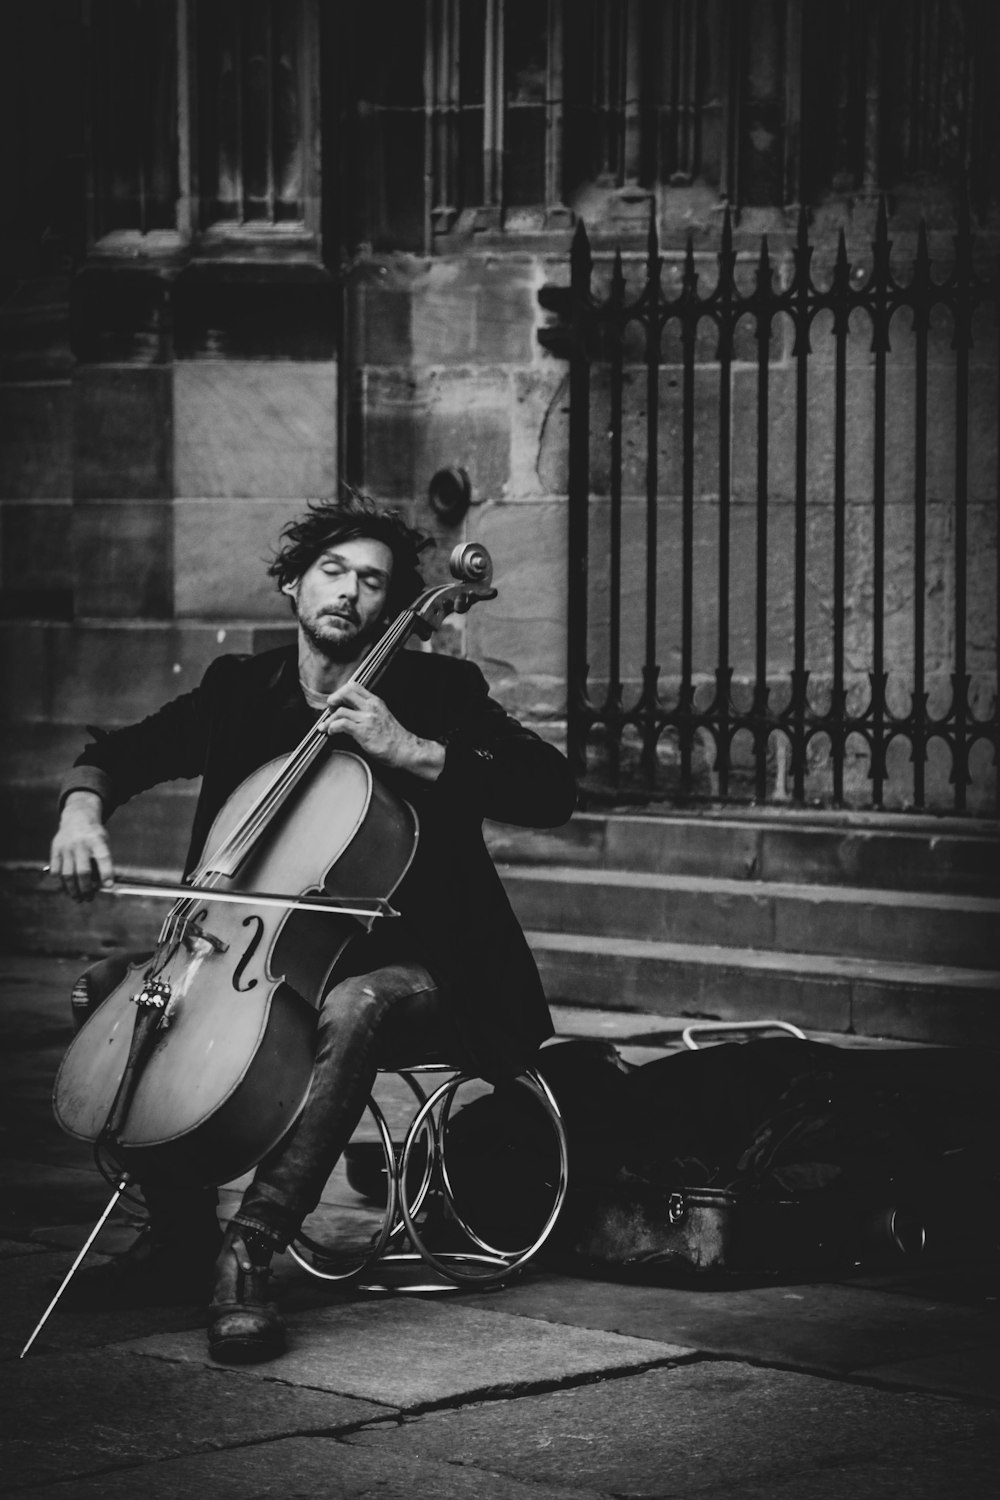 man playing violin on street in grayscale photography photo – Free  Strasbourg Image on Unsplash